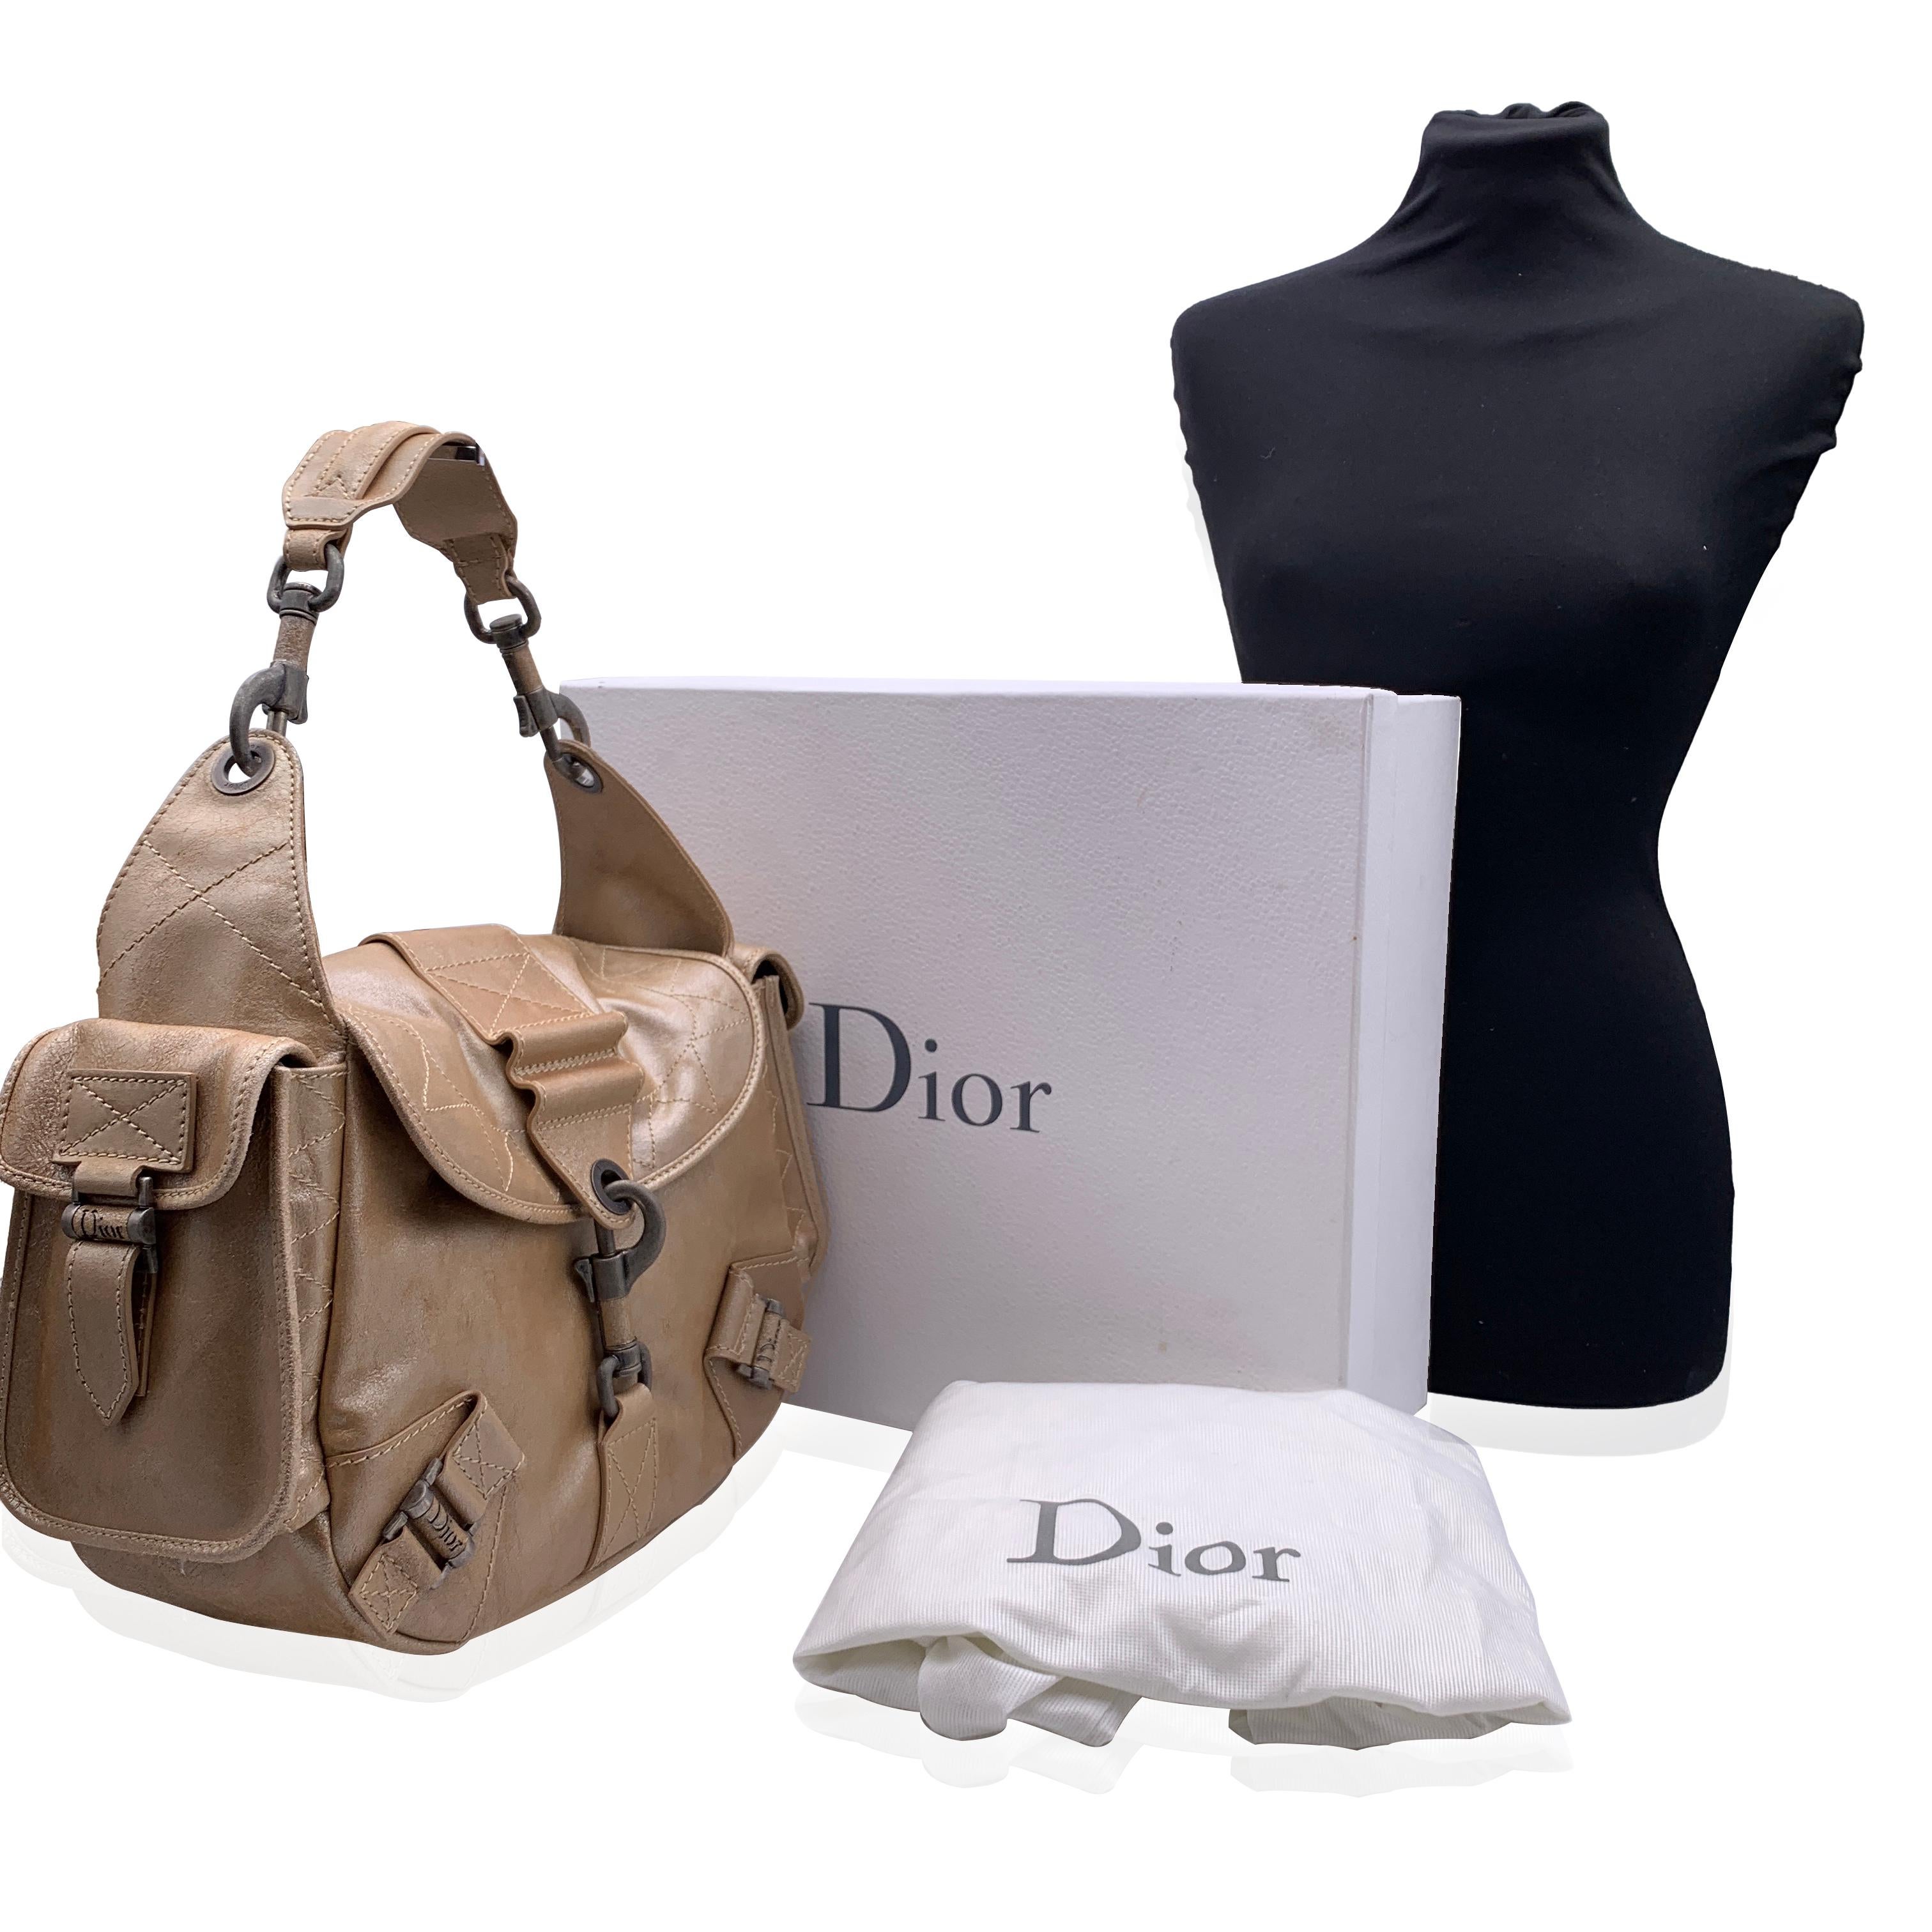 CHRISTIAN DIOR 'Rebelle' shoulder bag in leather from the 2006 collection. Beige color. Silver metal hardware. Flap with carabiner closure on the front. Flap pockets on the sides. Brown suede lining. 1 side zip pocket and 2 side open pockets inside.